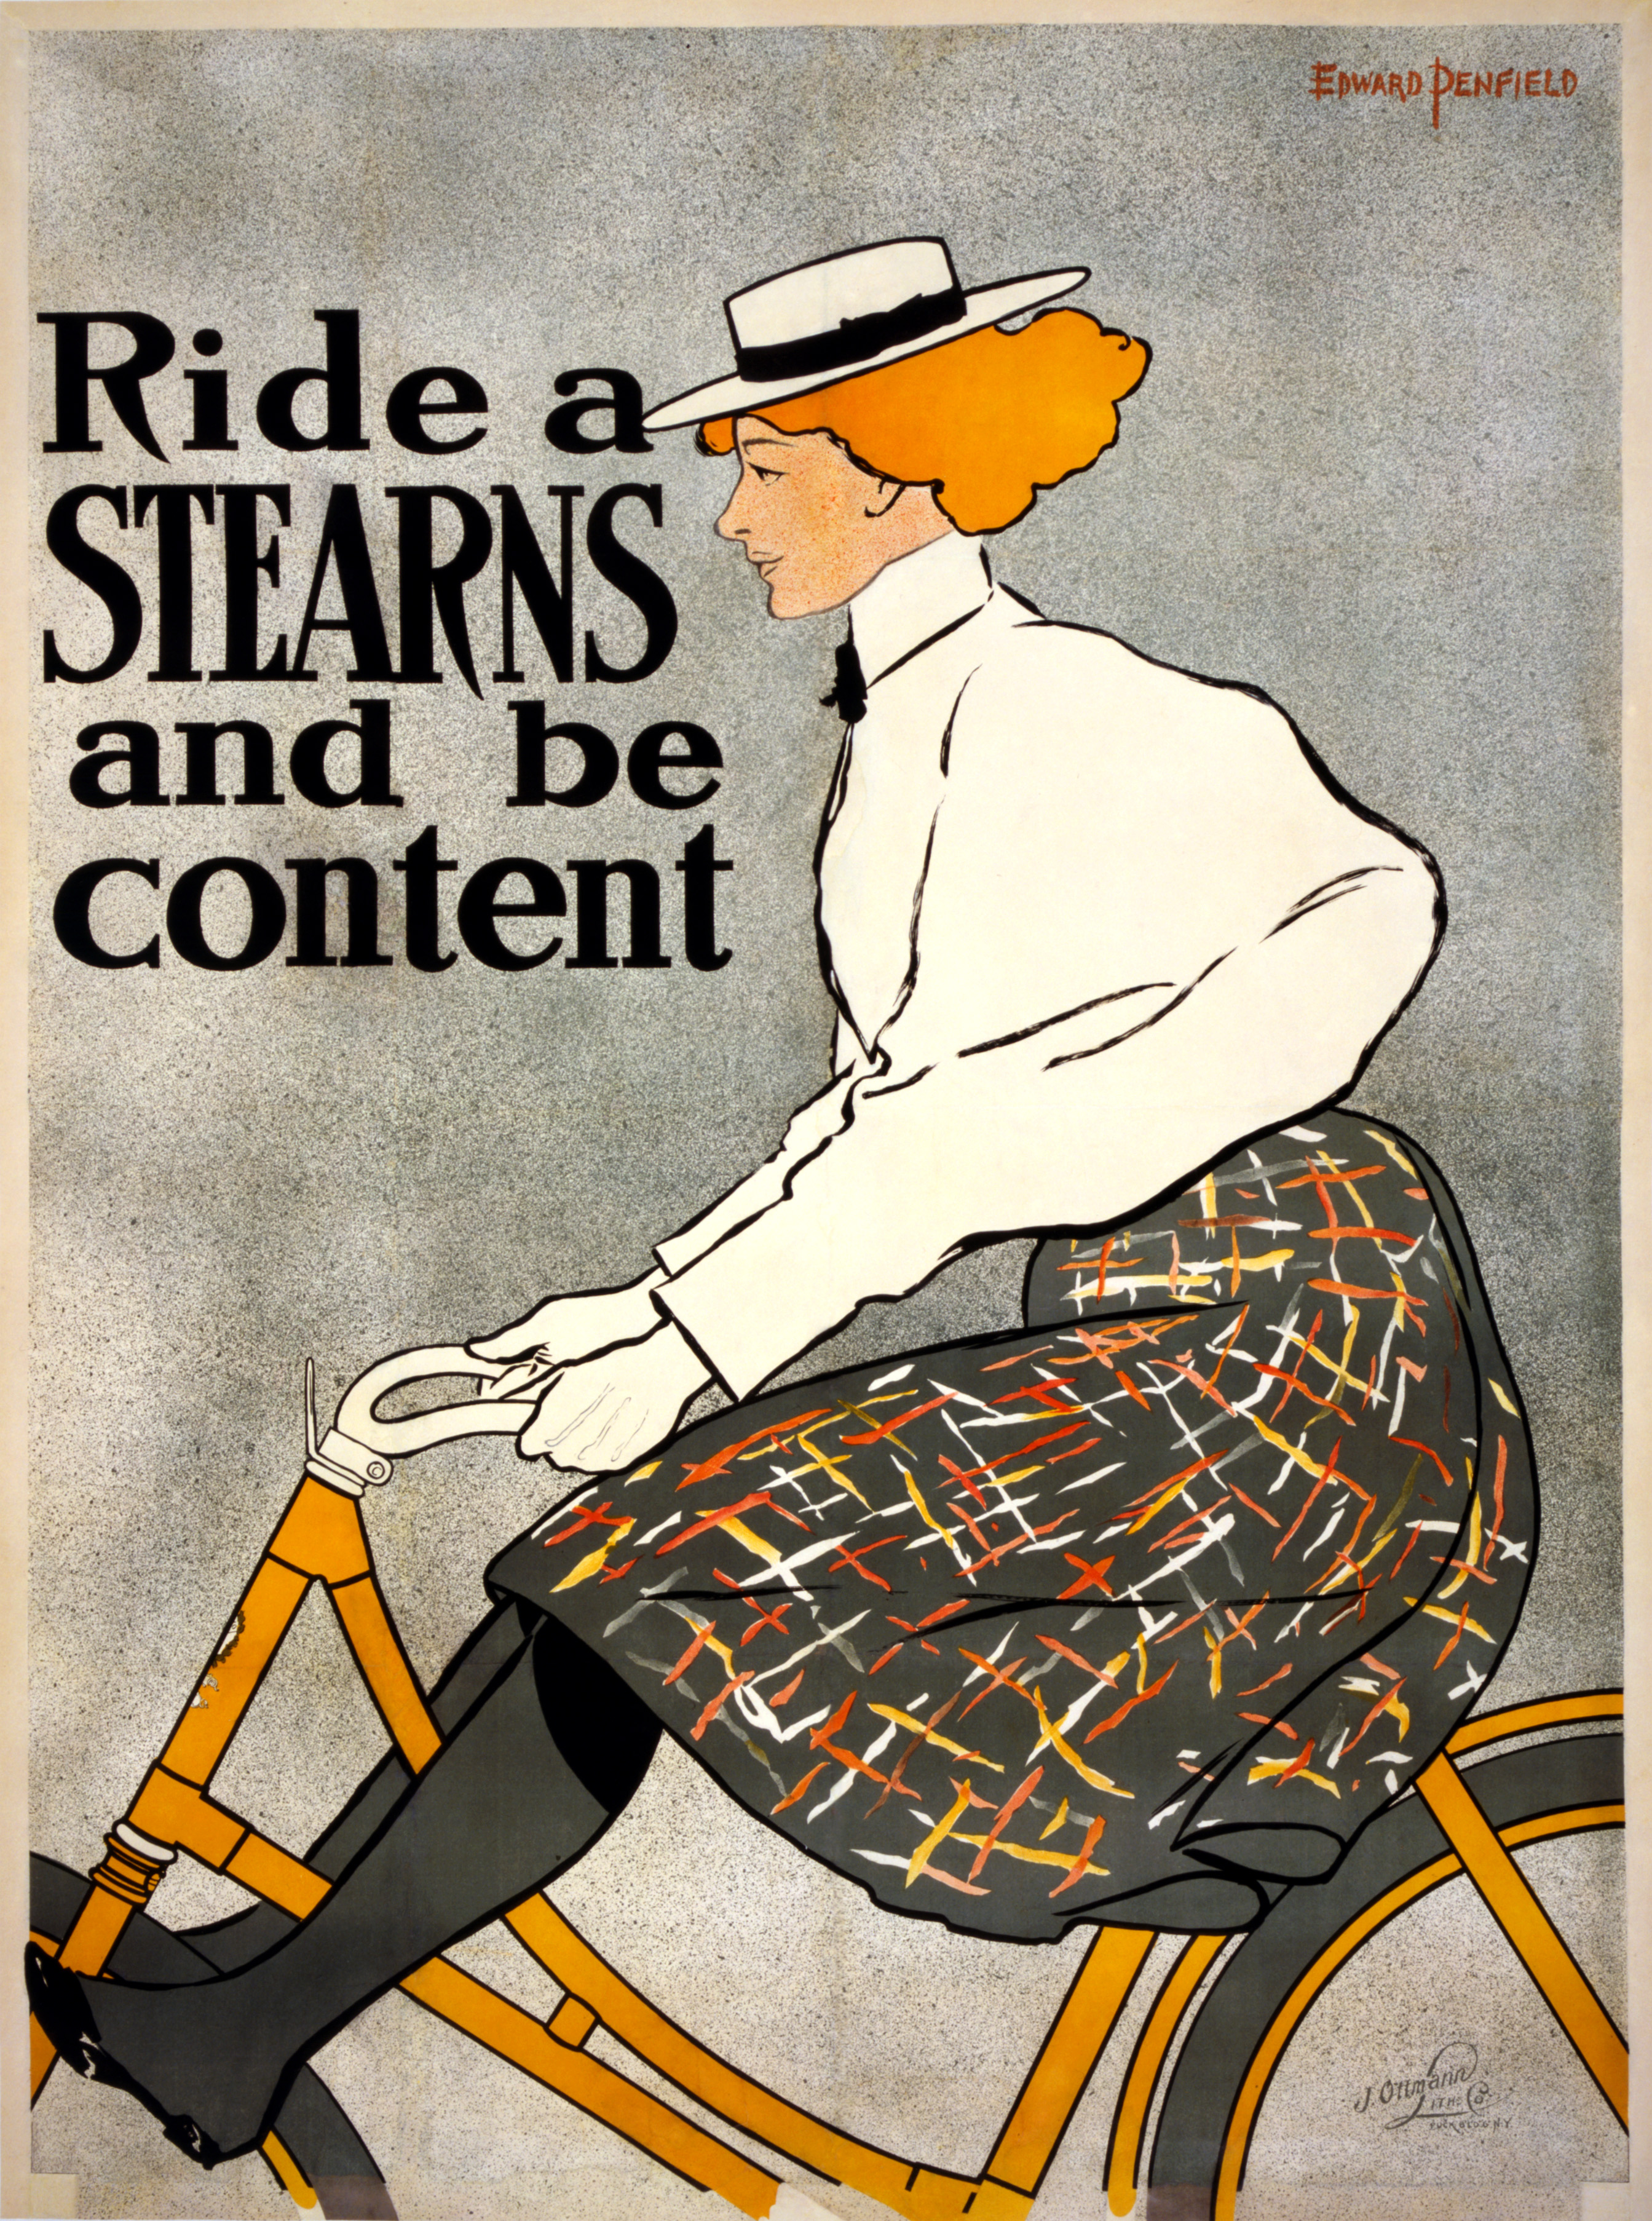 Ride a Stearns and be content, bicycle advertising poster, 1896